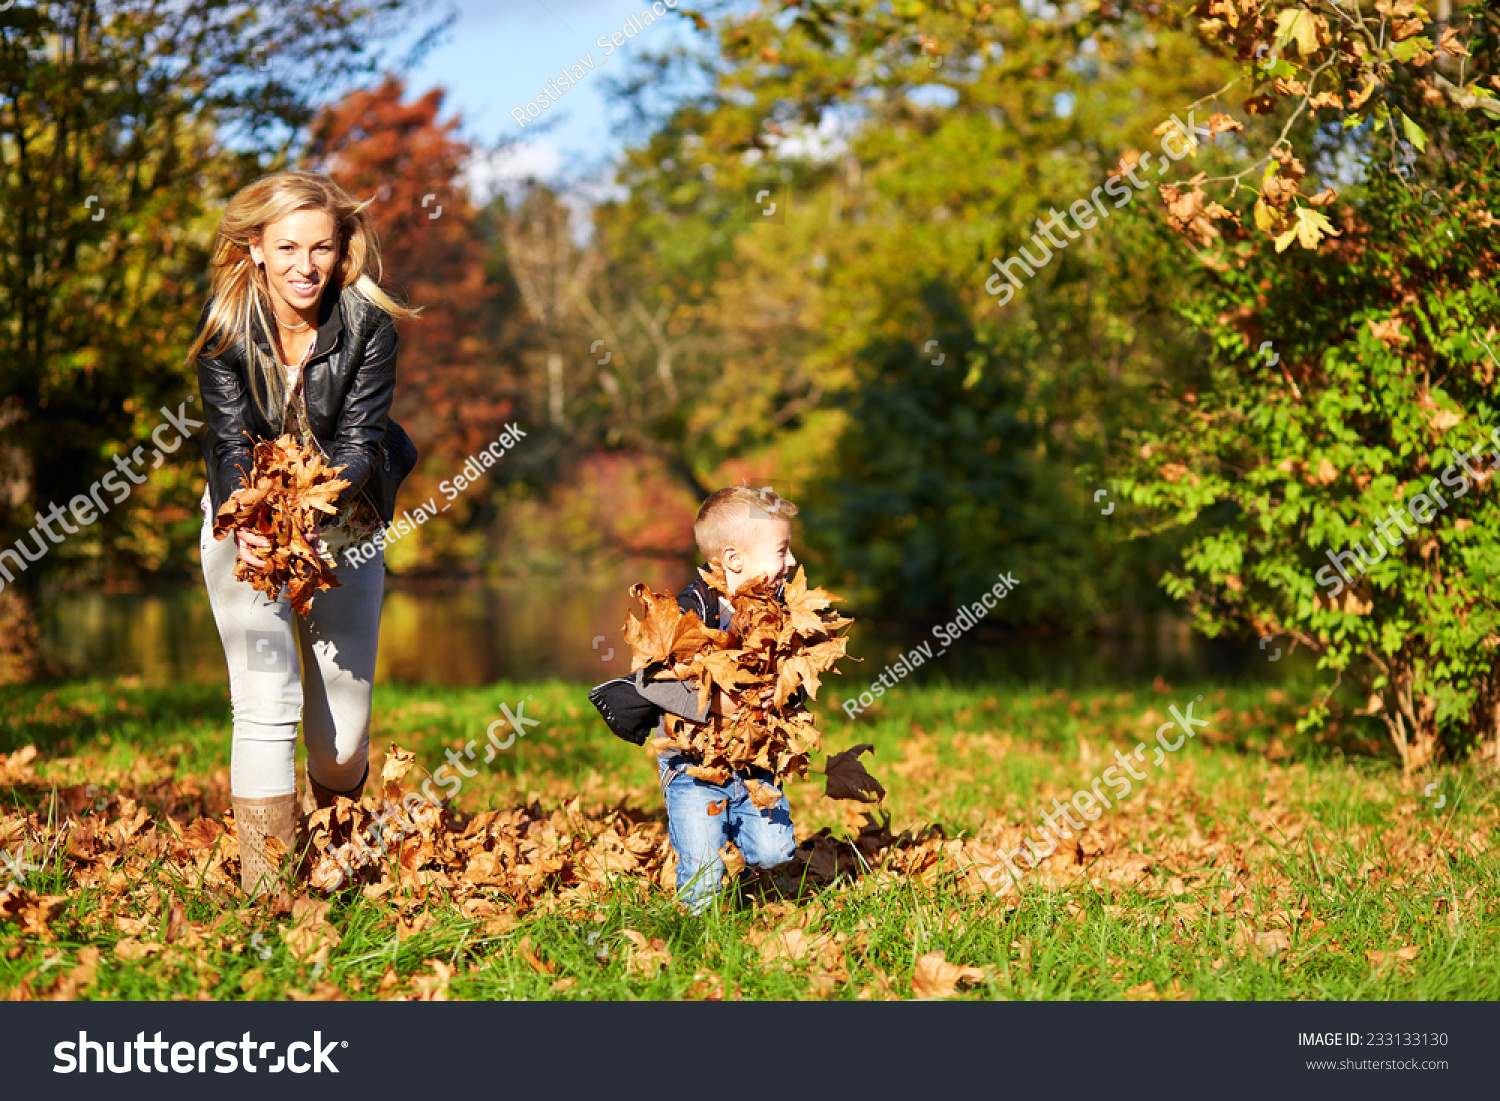 Little boy and mother playing together in the autumn park #233133130